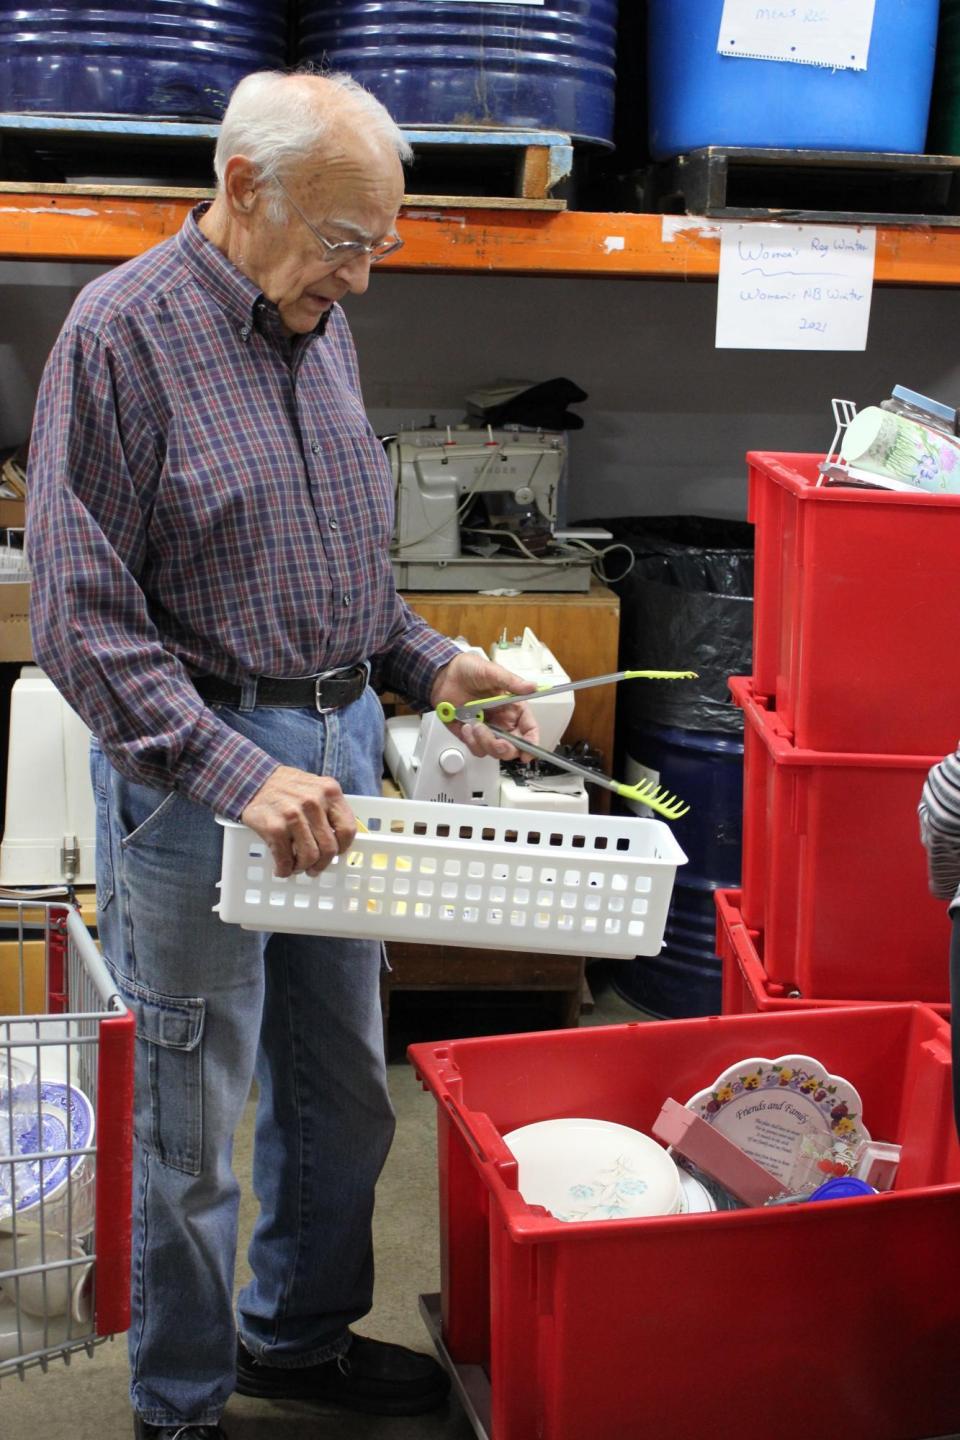 An older man sorts through items in the backroom of a thrift shop